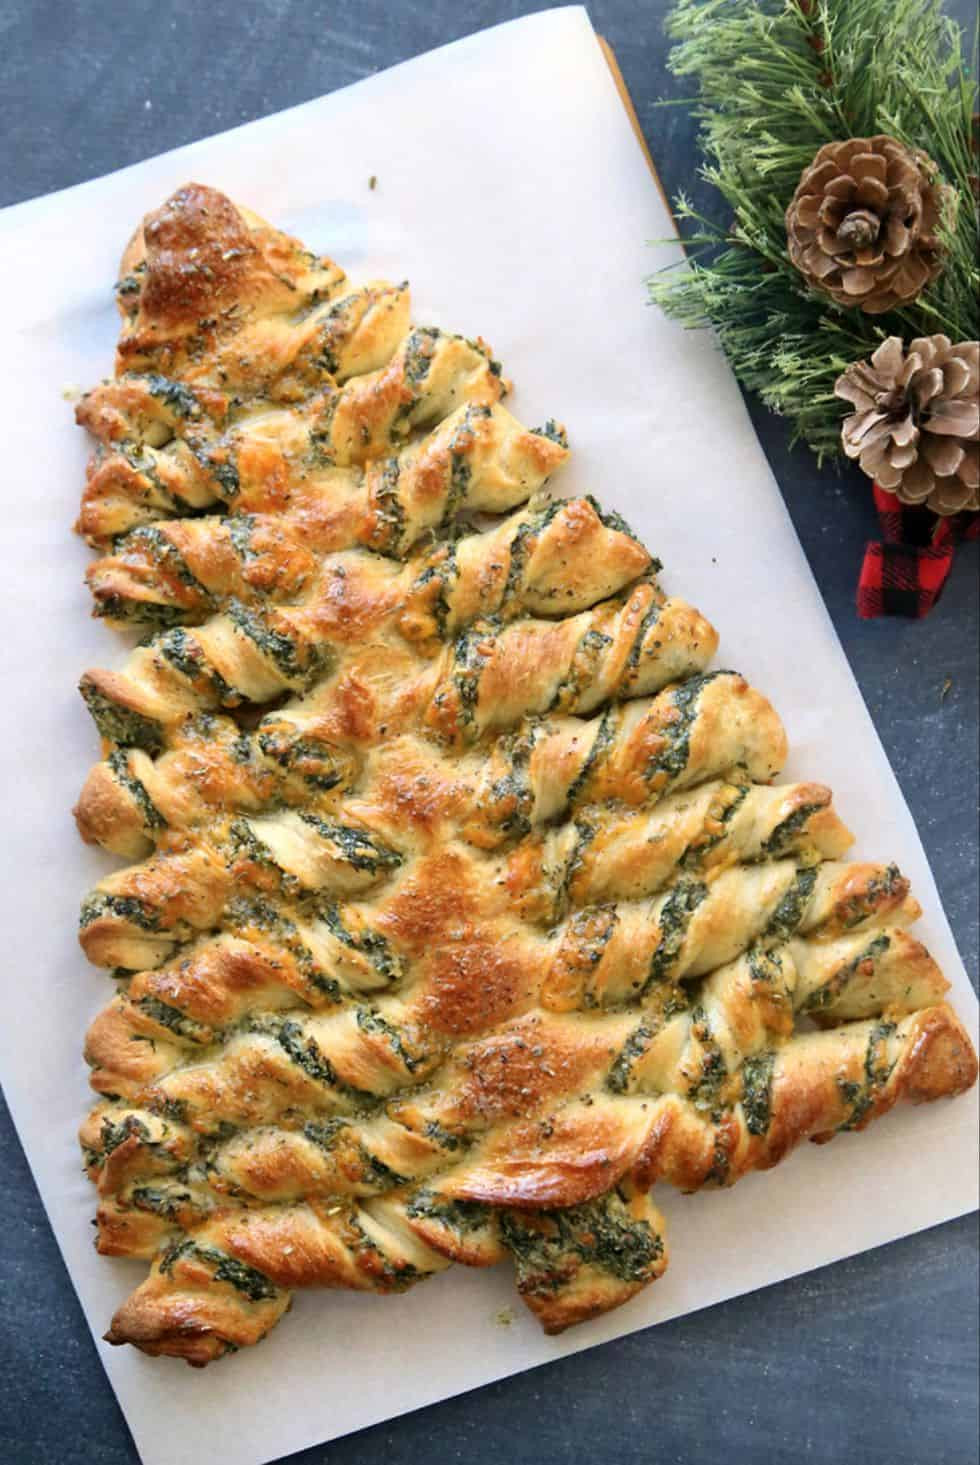 Good Christmas Appetizers
 15 Christmas Party Food Ideas That Will Top Previous Years